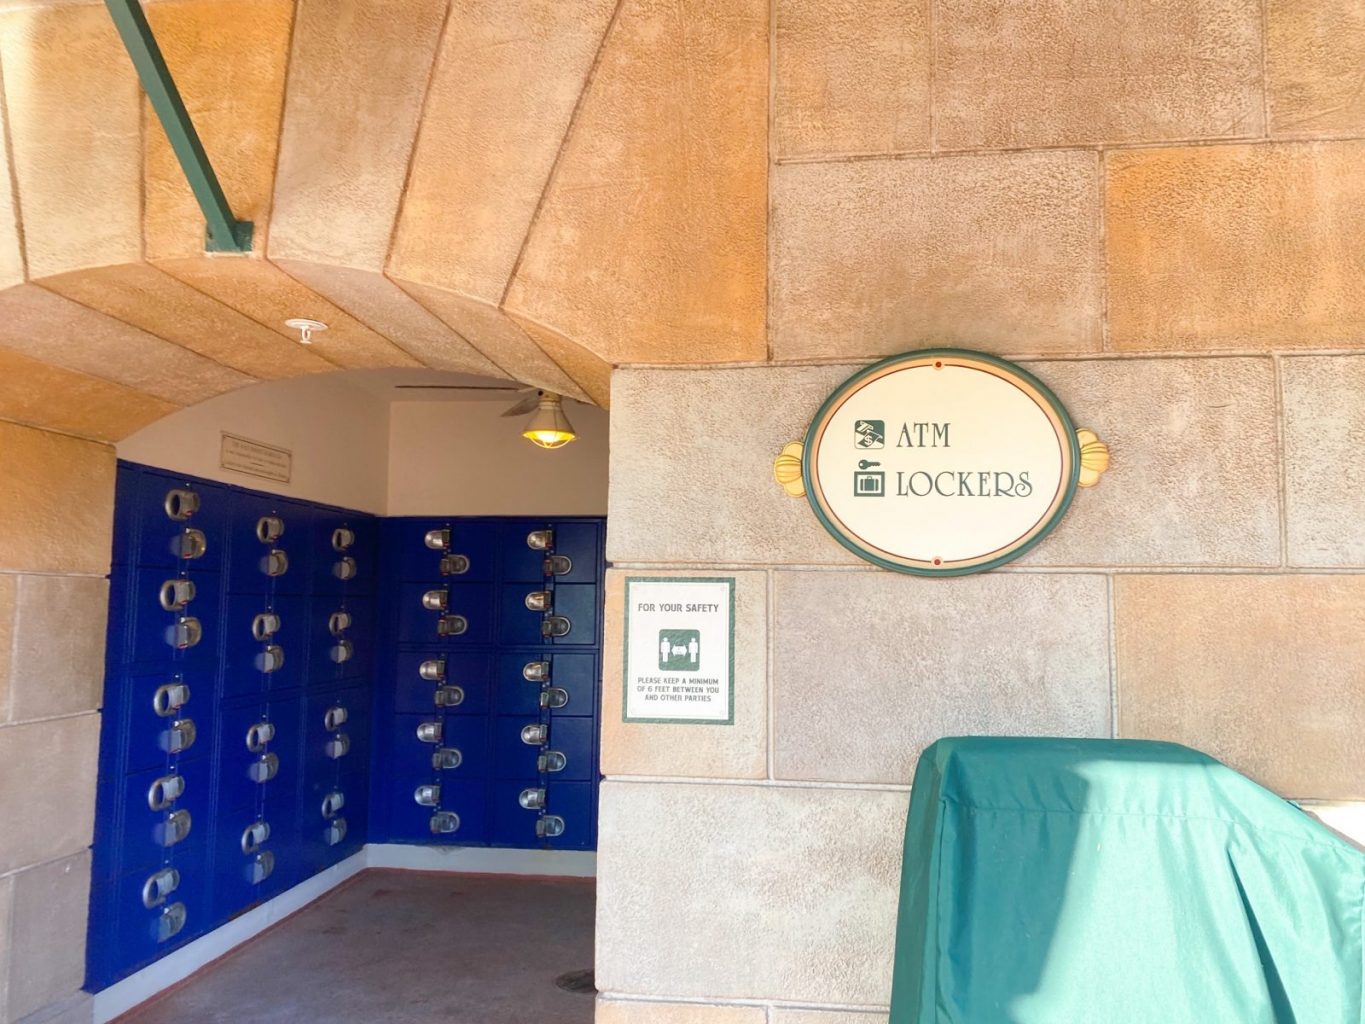 Some of the lockers at the Epcot International Gateway